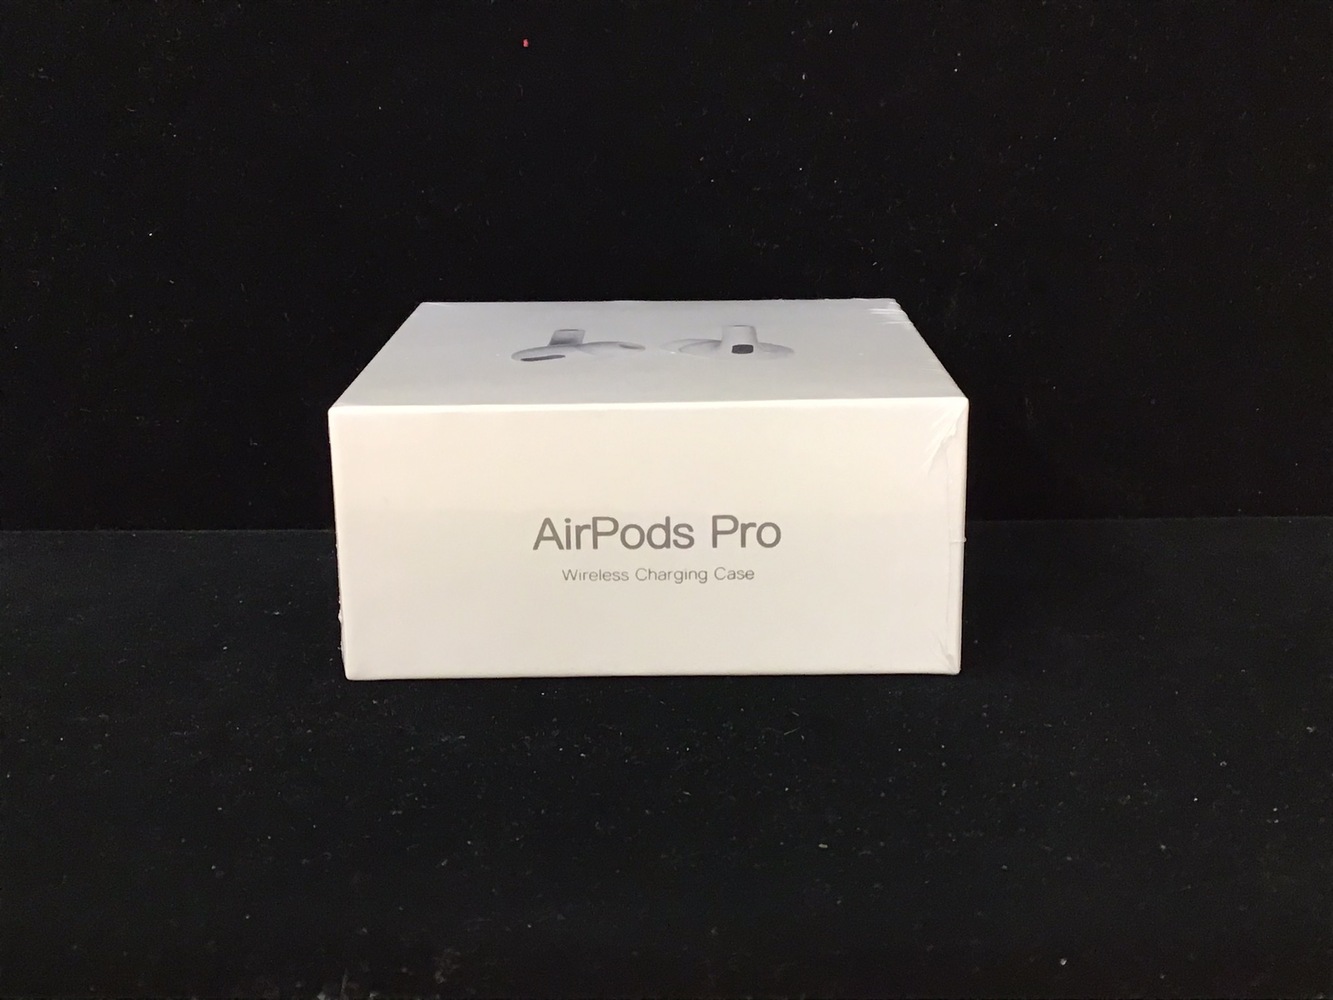 apple◇イヤホン/airpods pro/magsafe/mlwk3j/a/a2190/a2083/a2084